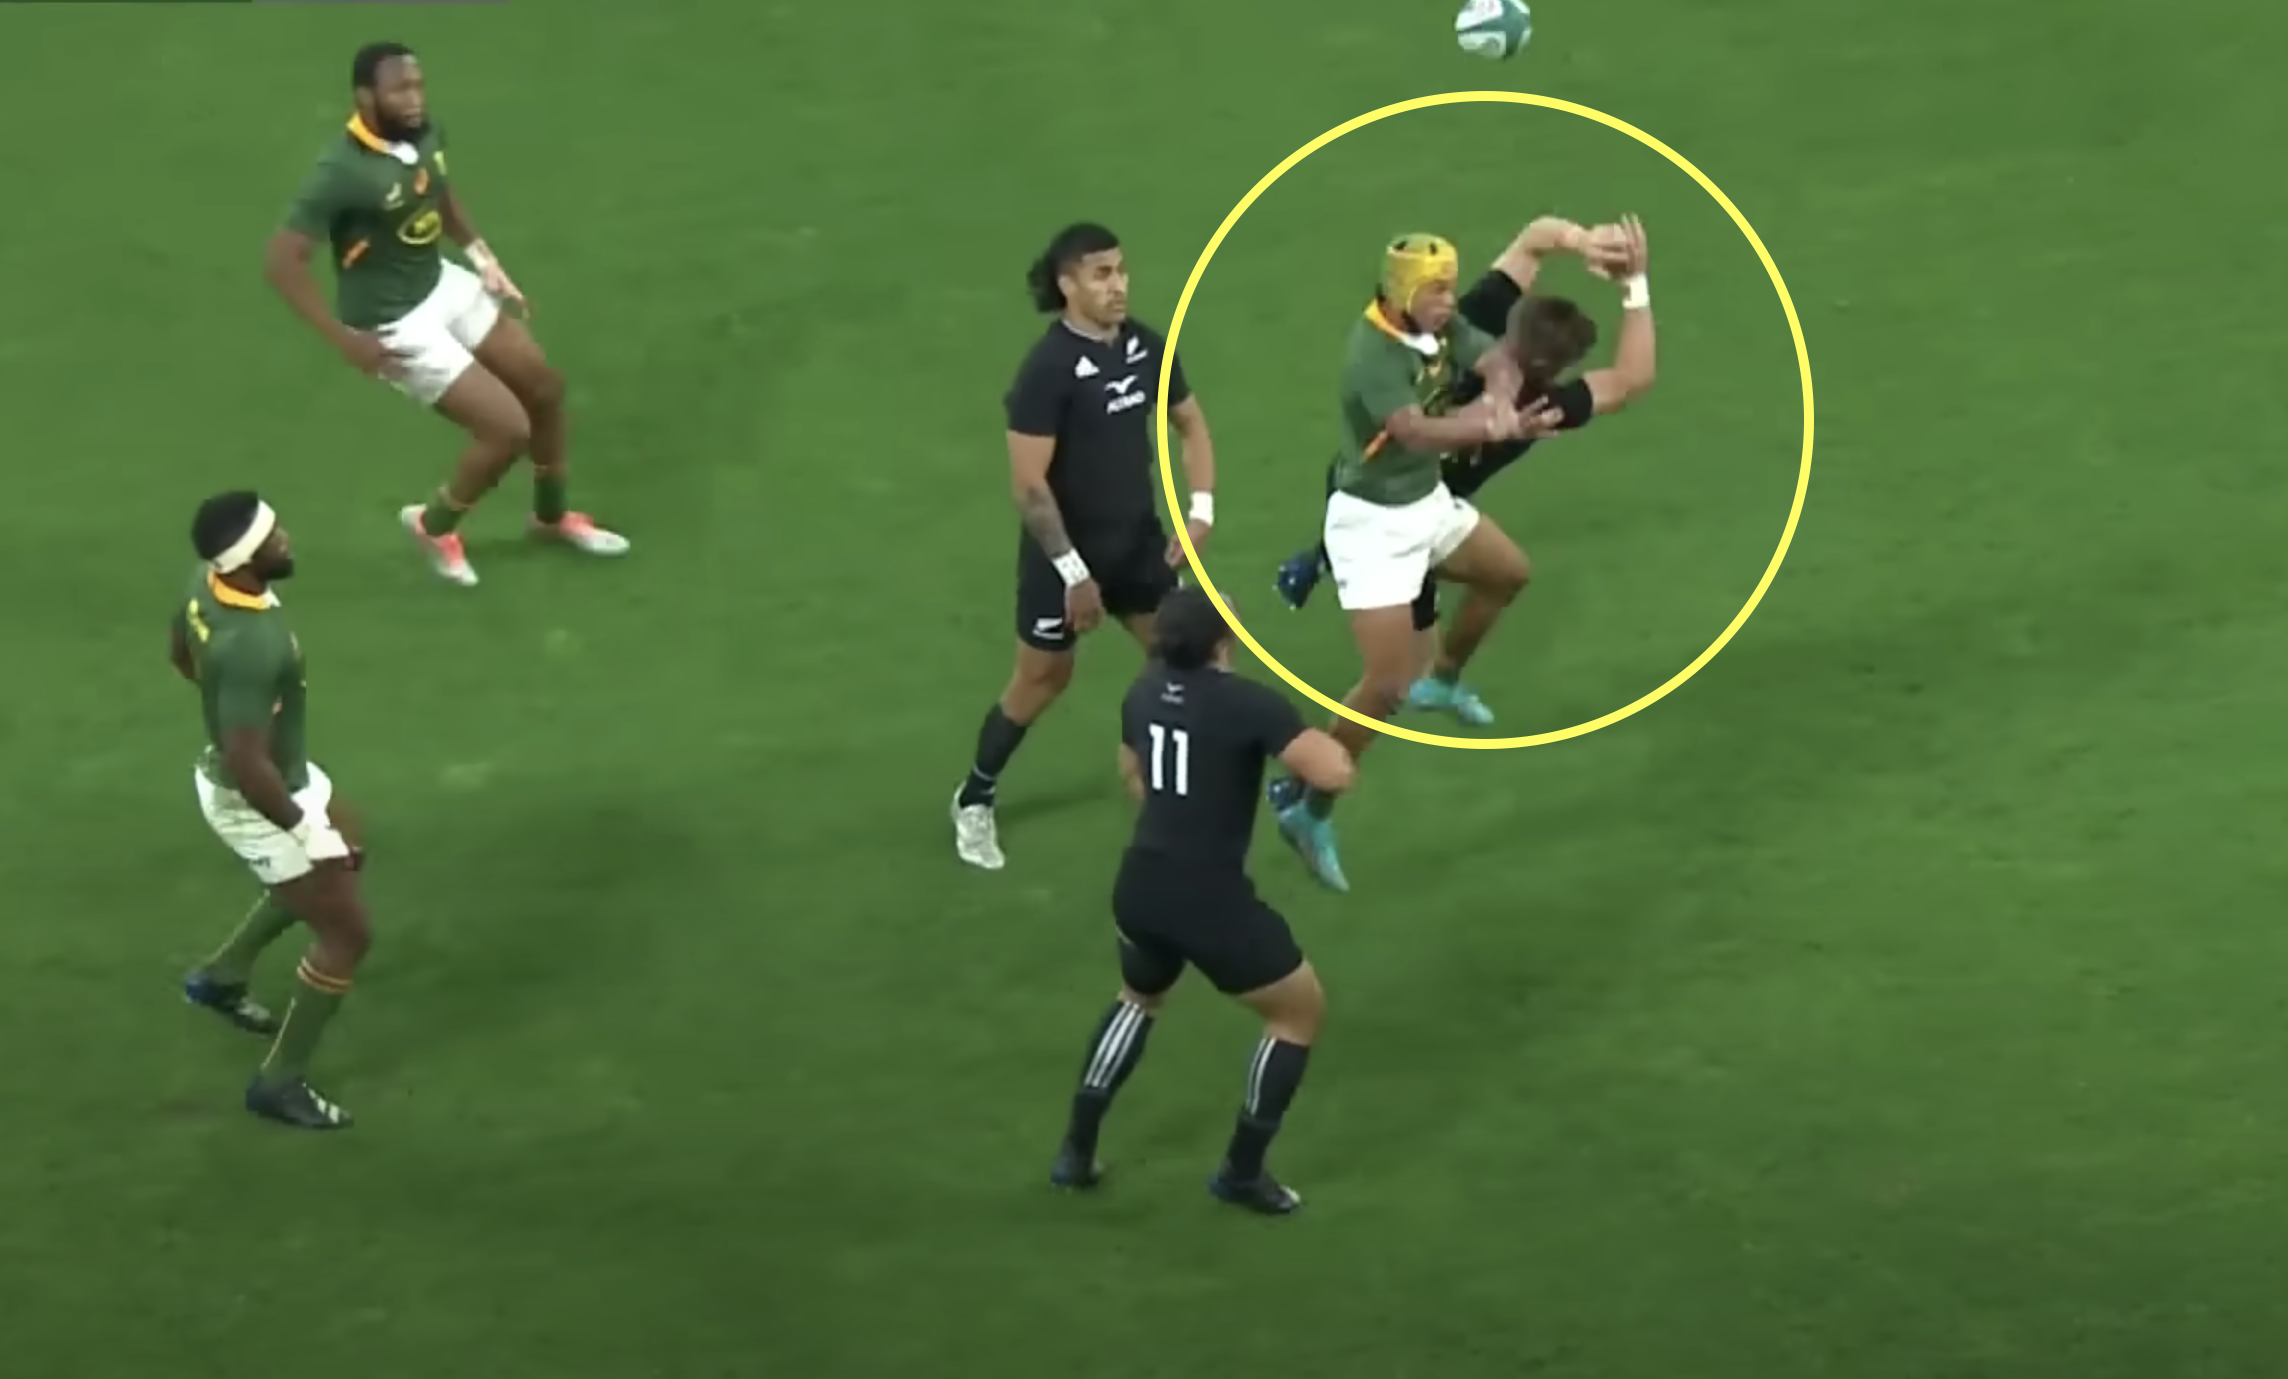 All Blacks learn from first Test to cancel Boks' try scoring move